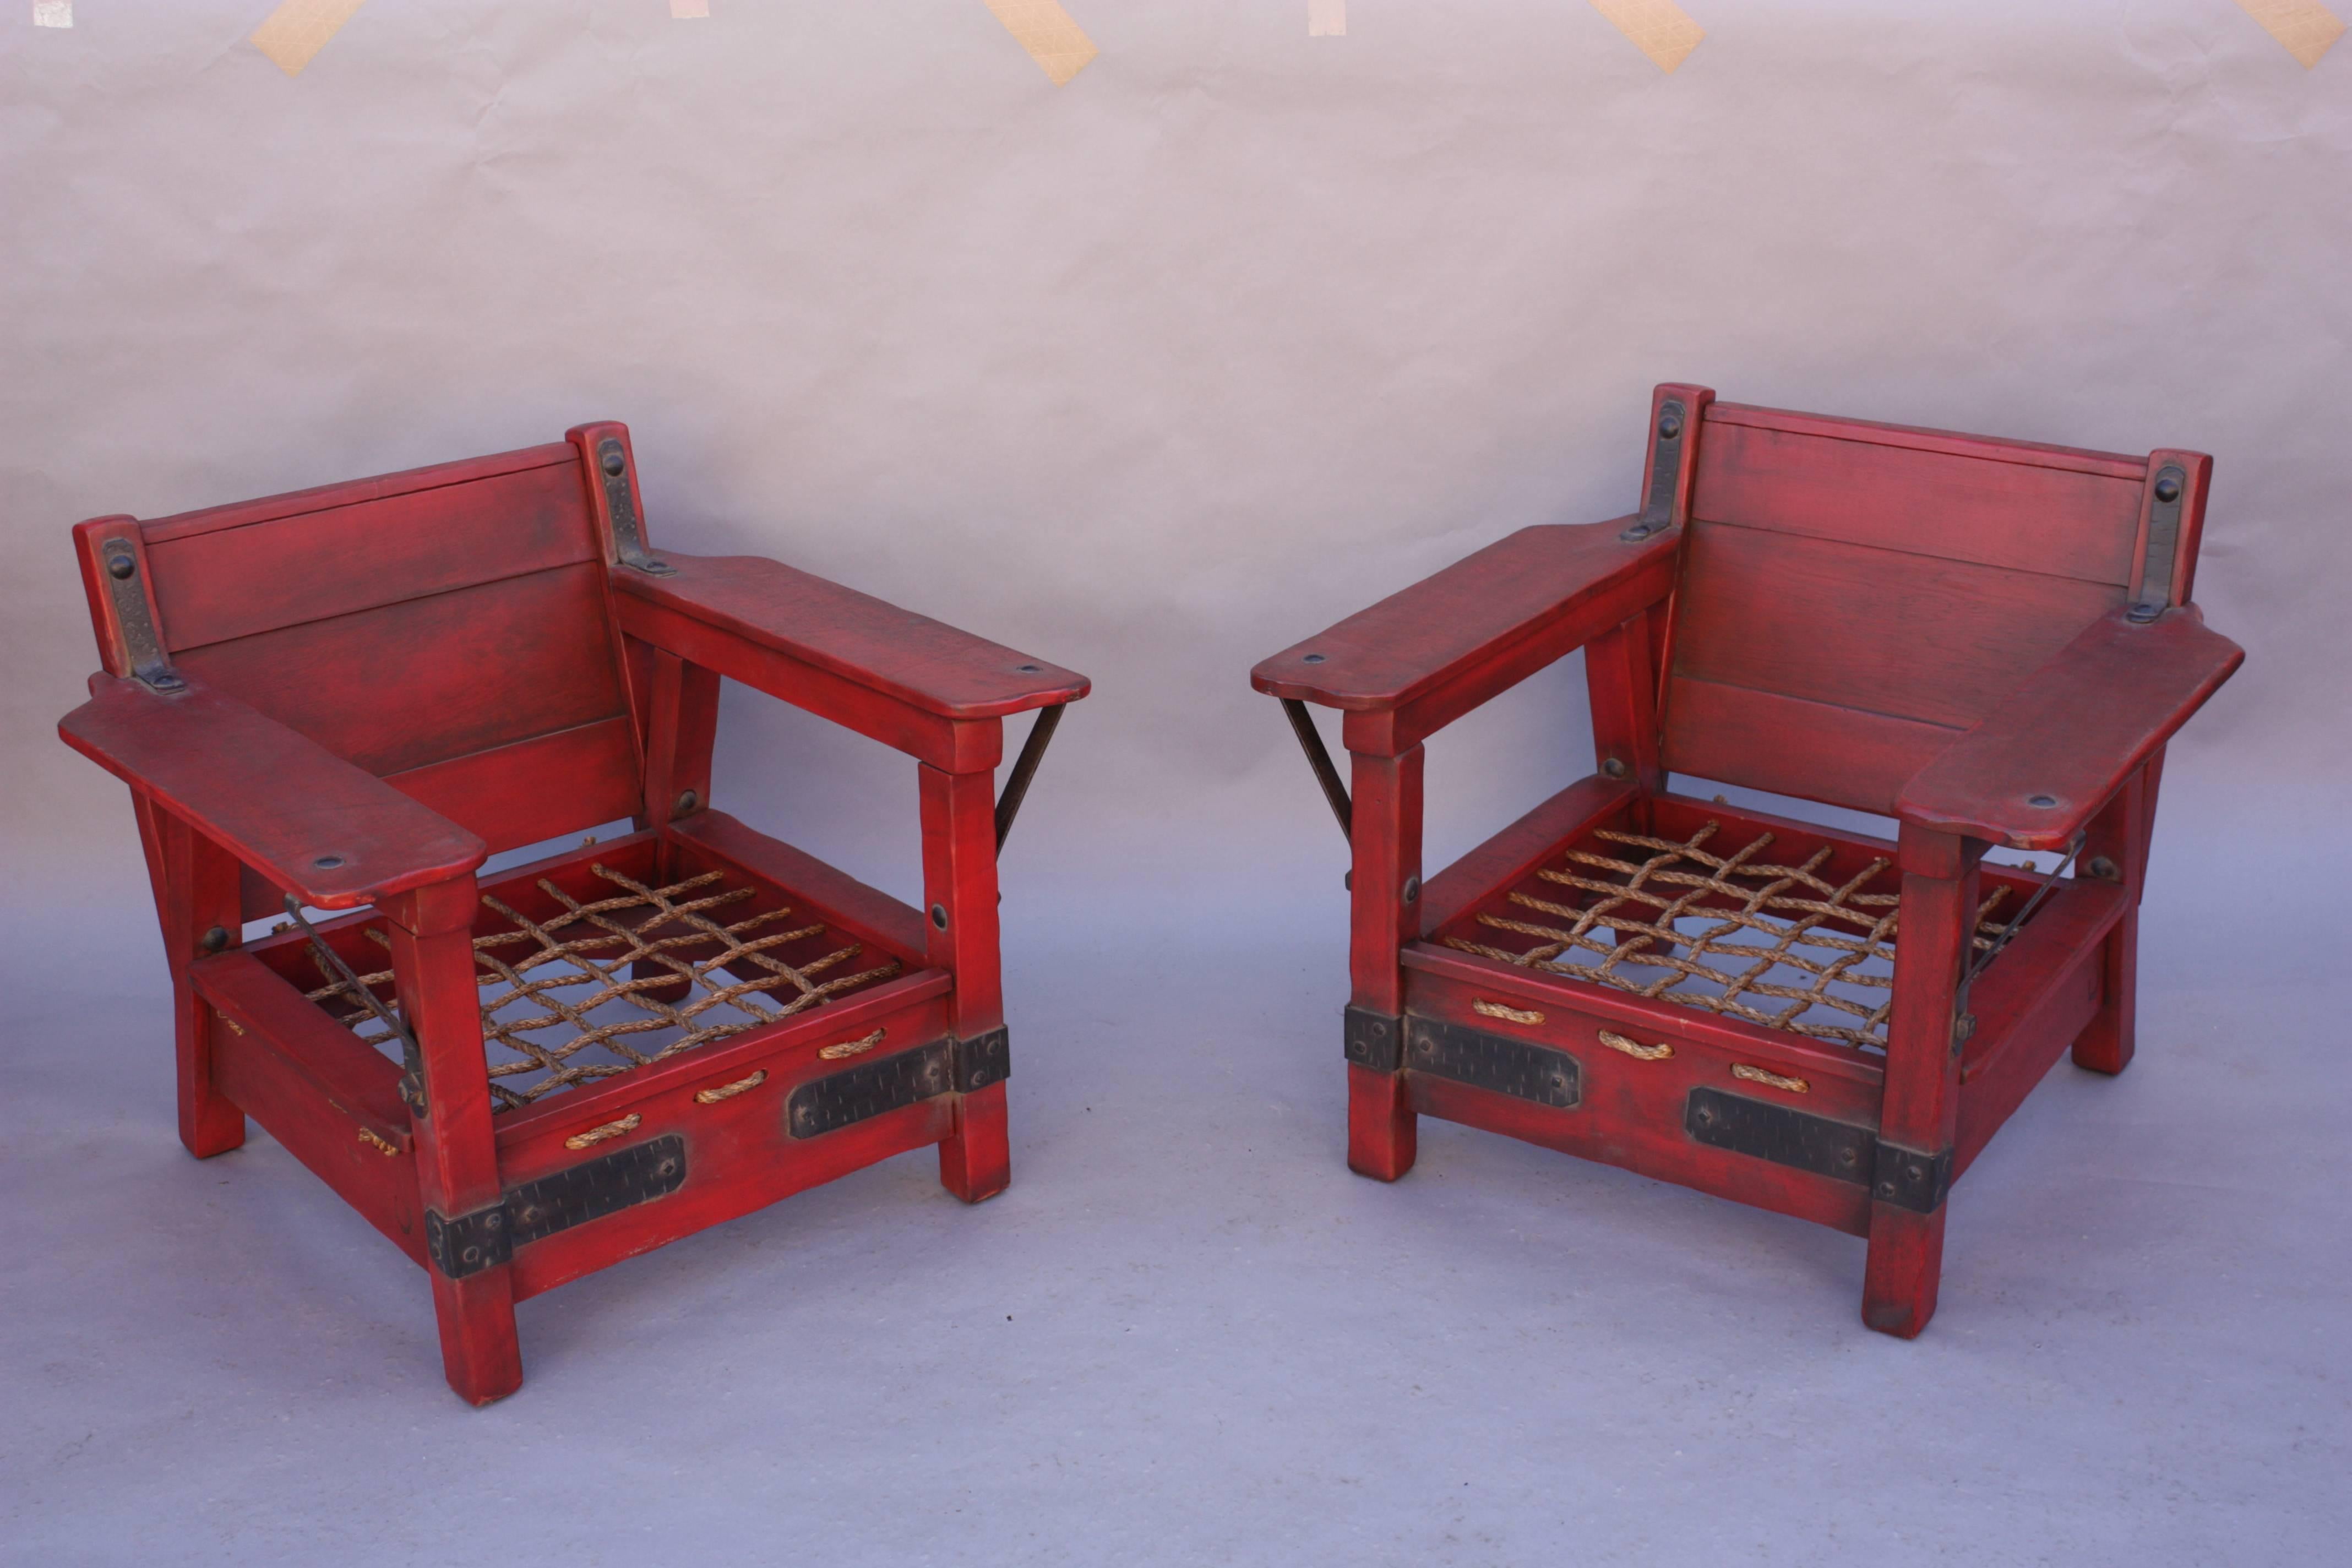 Early Classic monterey pair of rare red club chairs. The pair retains the original red color but some of the floral painting was professionally restored. Branded with the horseshoe mark. Measures: 30.25